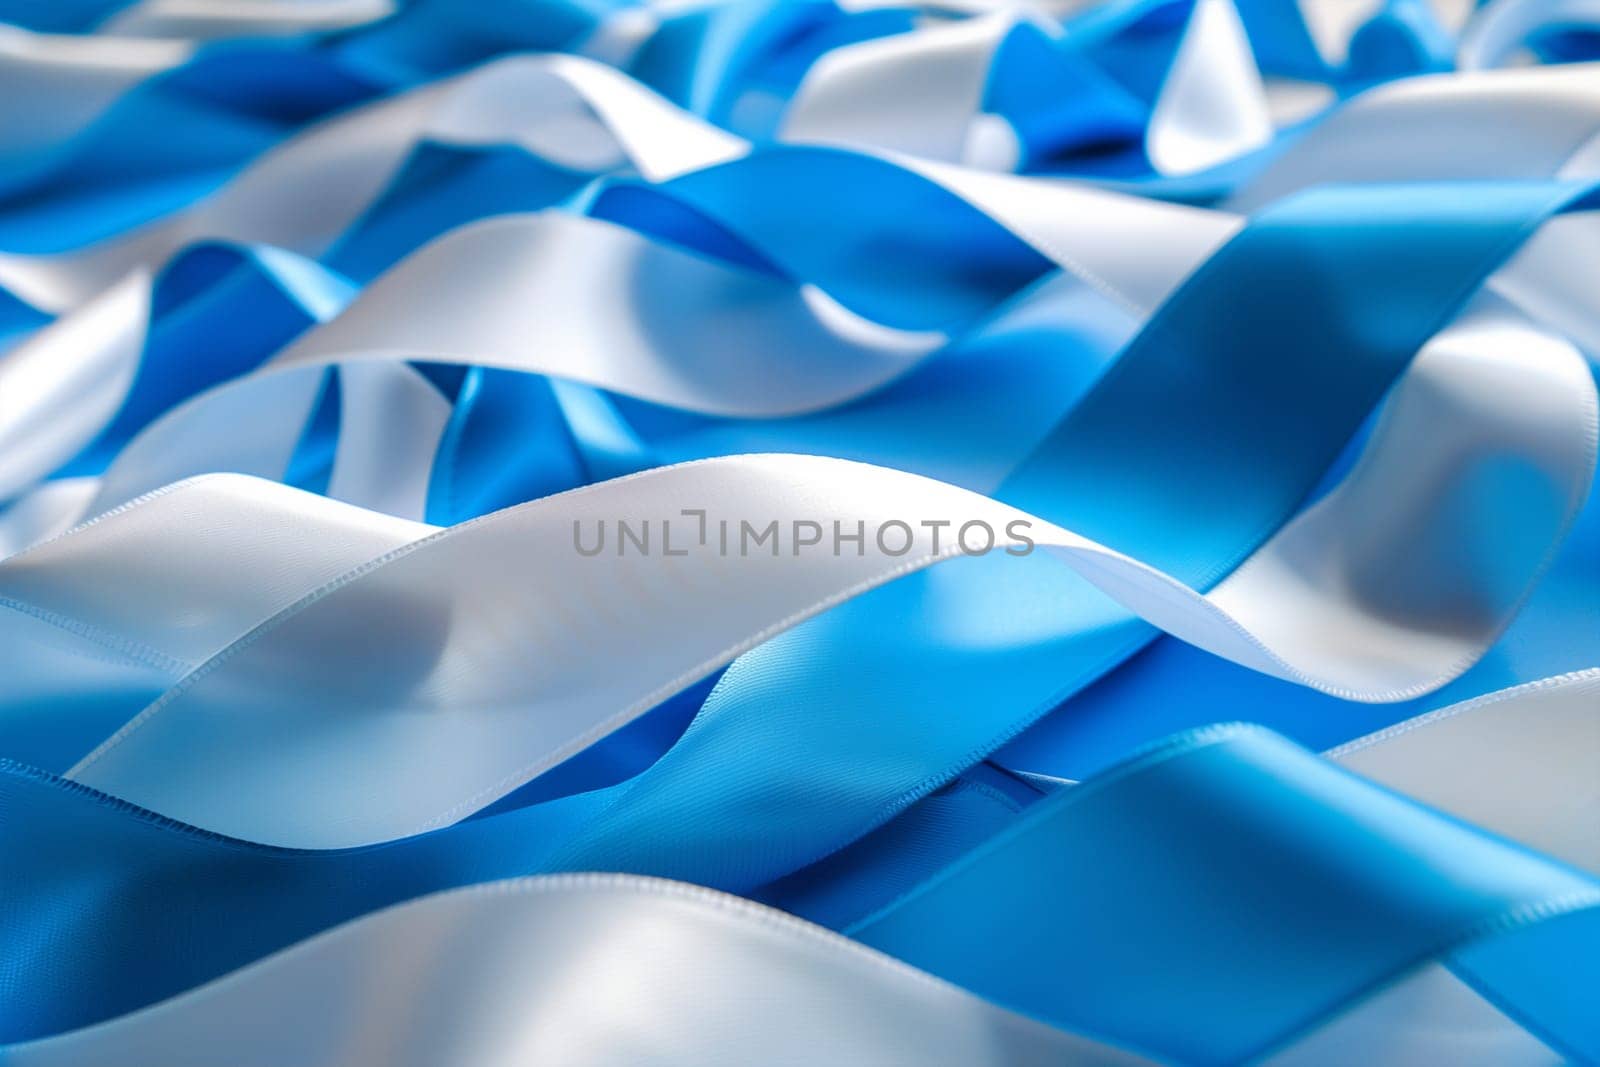 A background featuring wavy ribbons in shades of blue and white, creating a dynamic and playful visual effect.